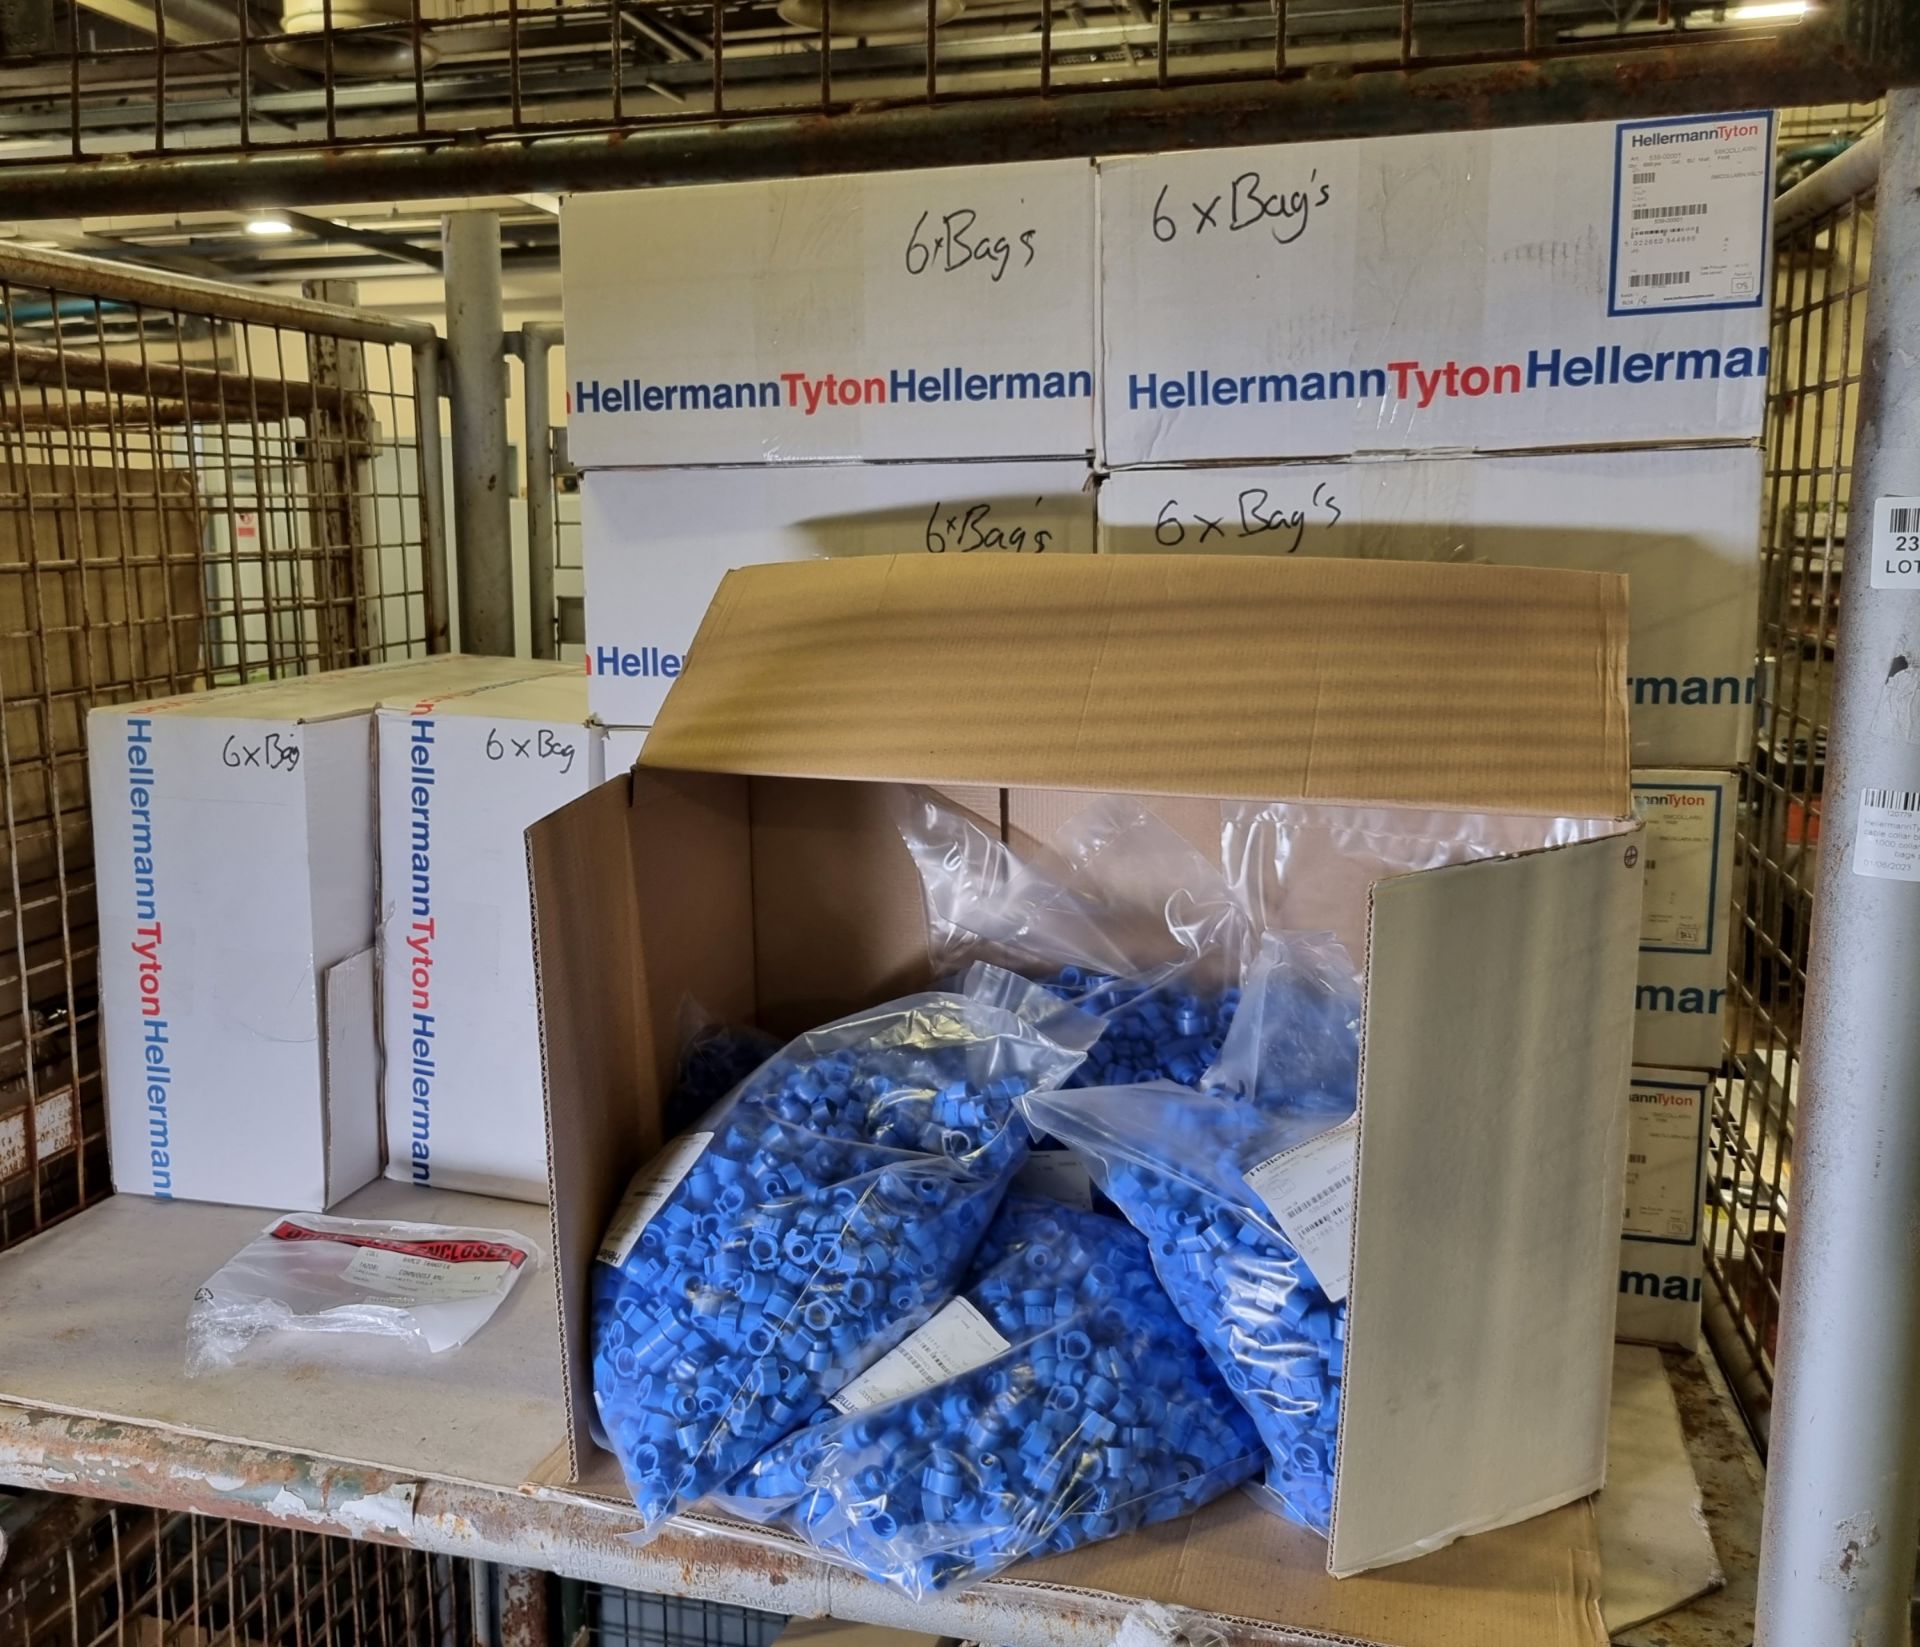 11x boxes of HellermannTyton smart meter cable collar blue (B - Neutral) - 1000 collars per pack